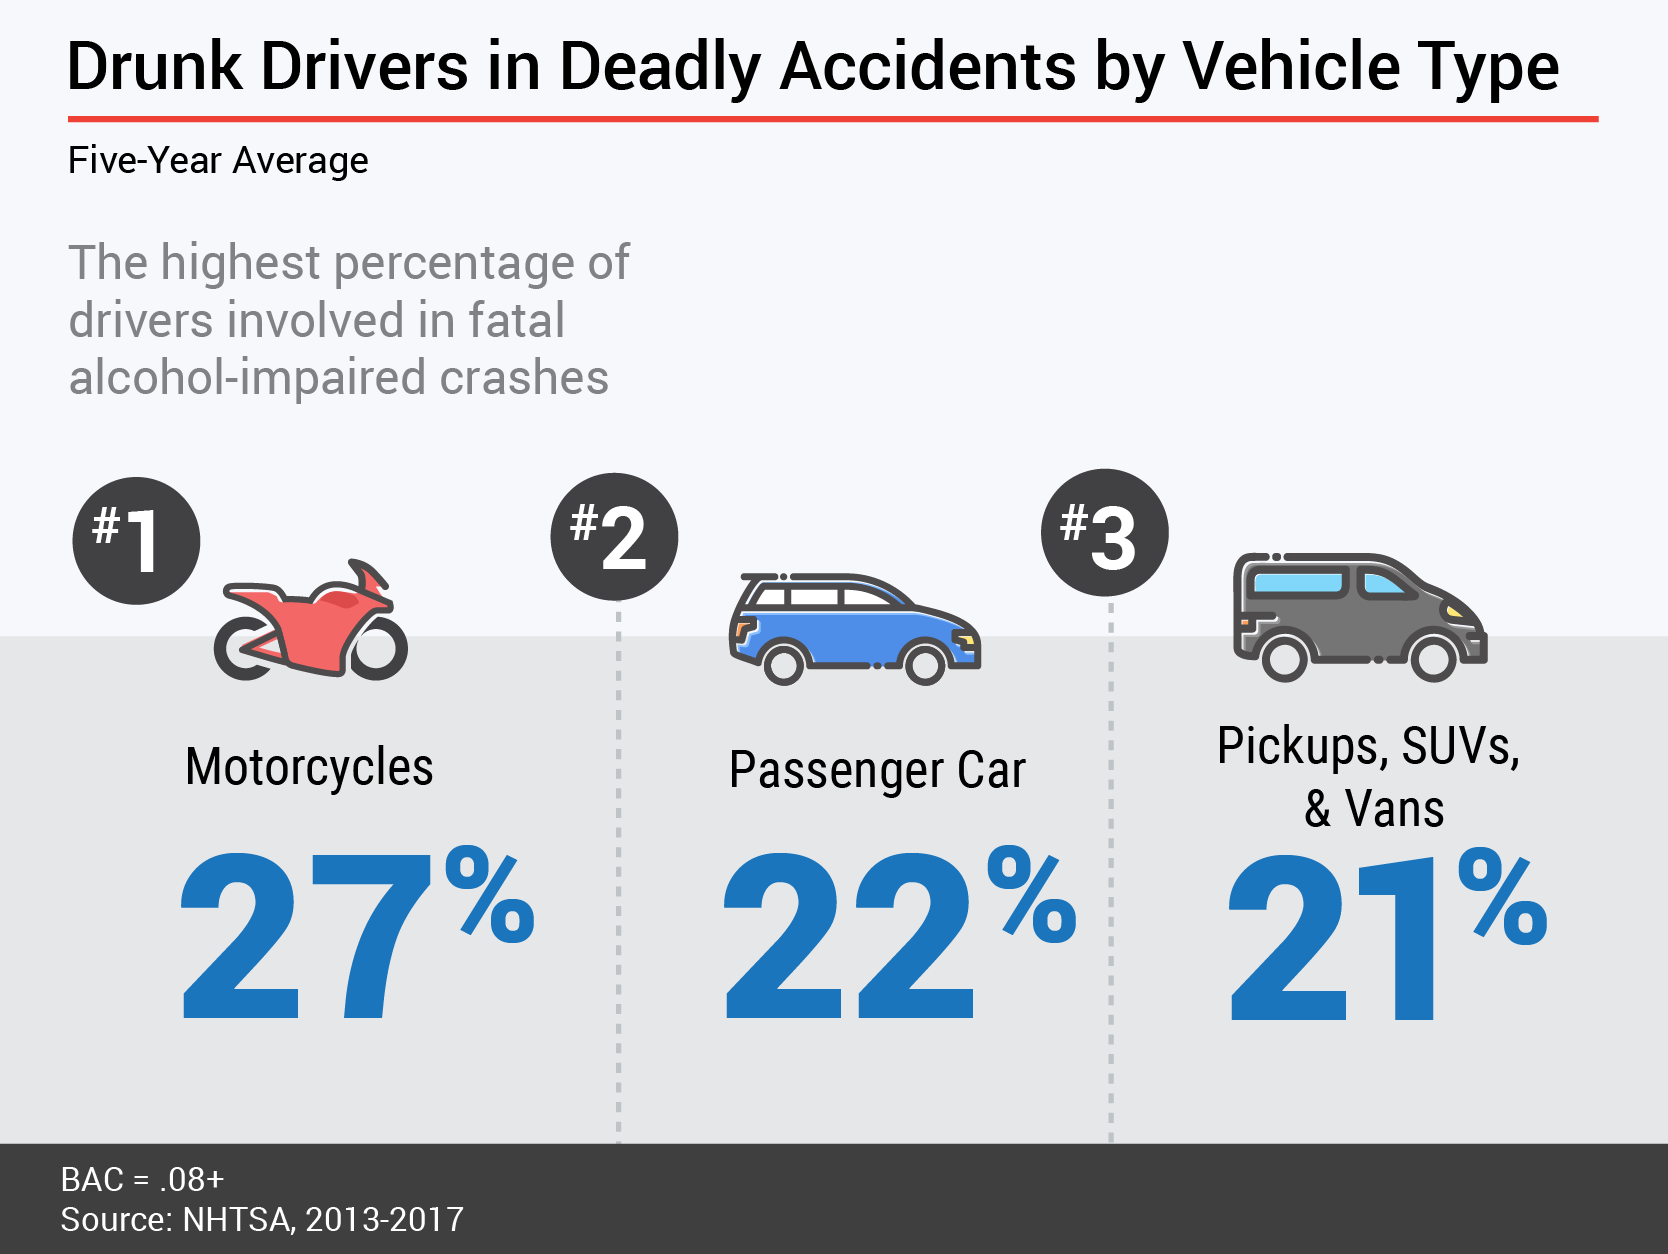 Drunk Driver Study - Fatal Crashes by Vehicle Type